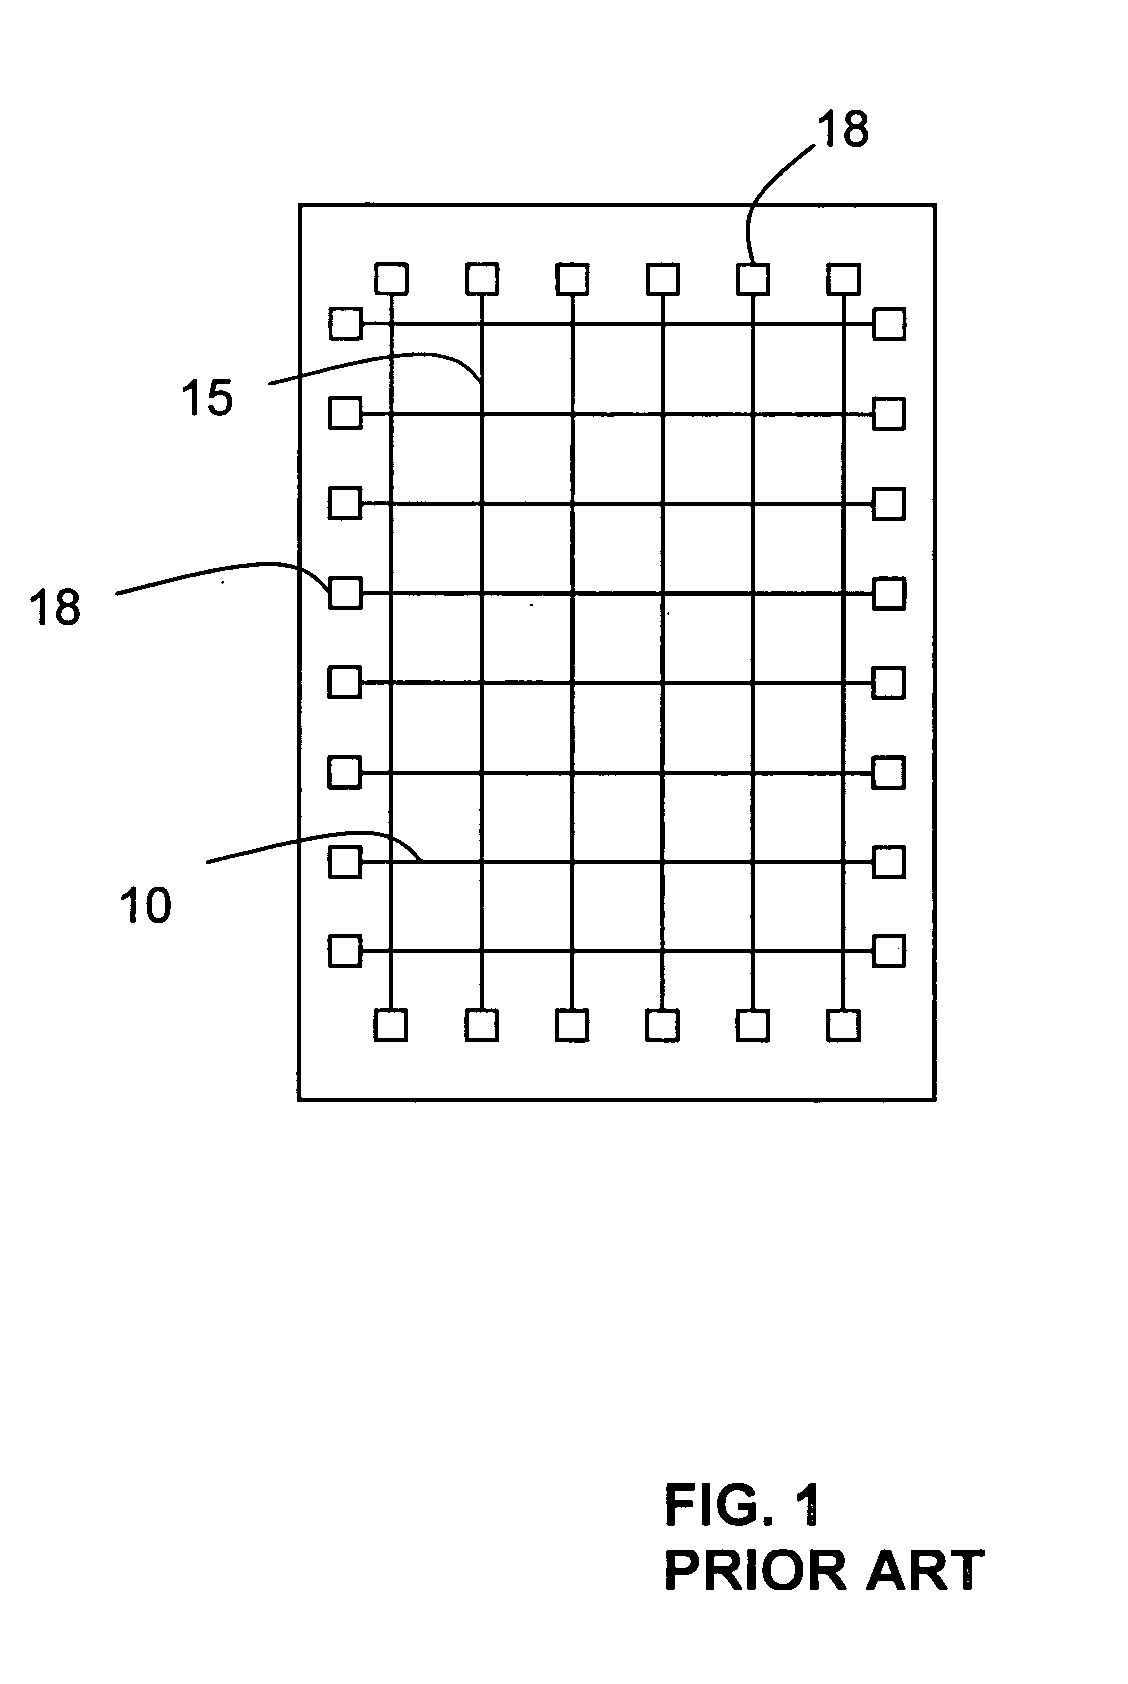 Electro-optic displays with single edge addressing and removable driver circuitry